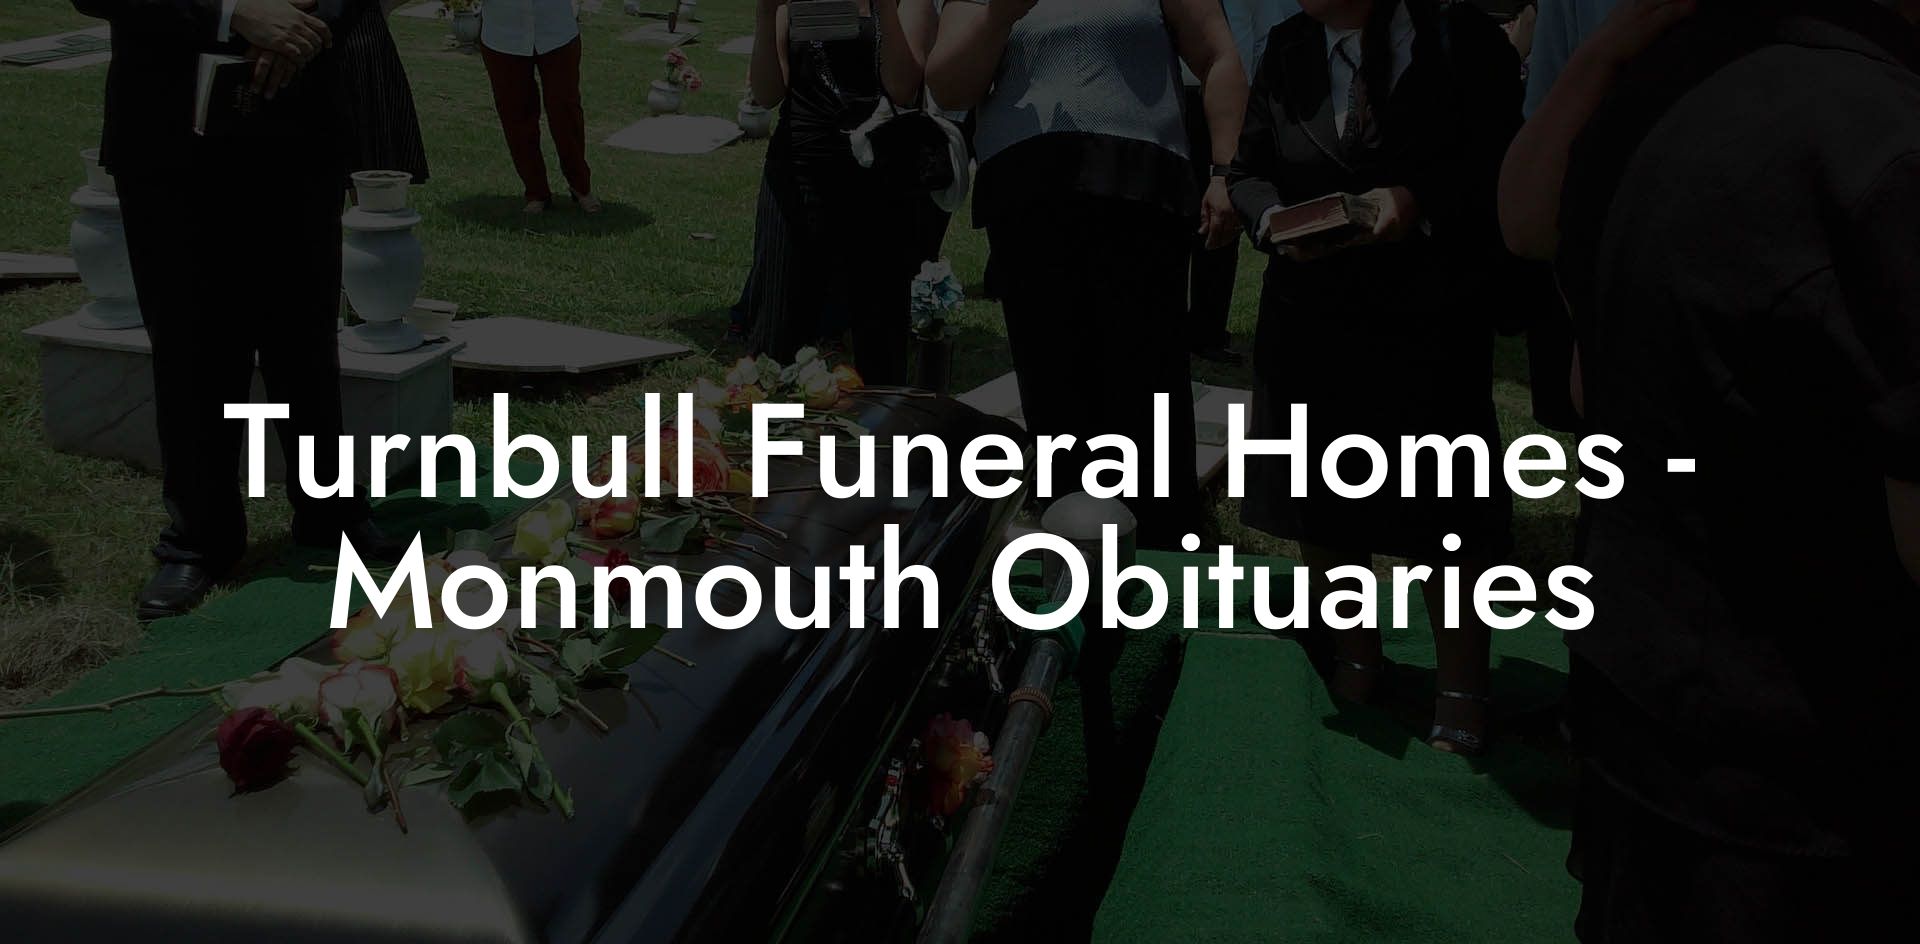 Turnbull Funeral Homes - Monmouth Obituaries